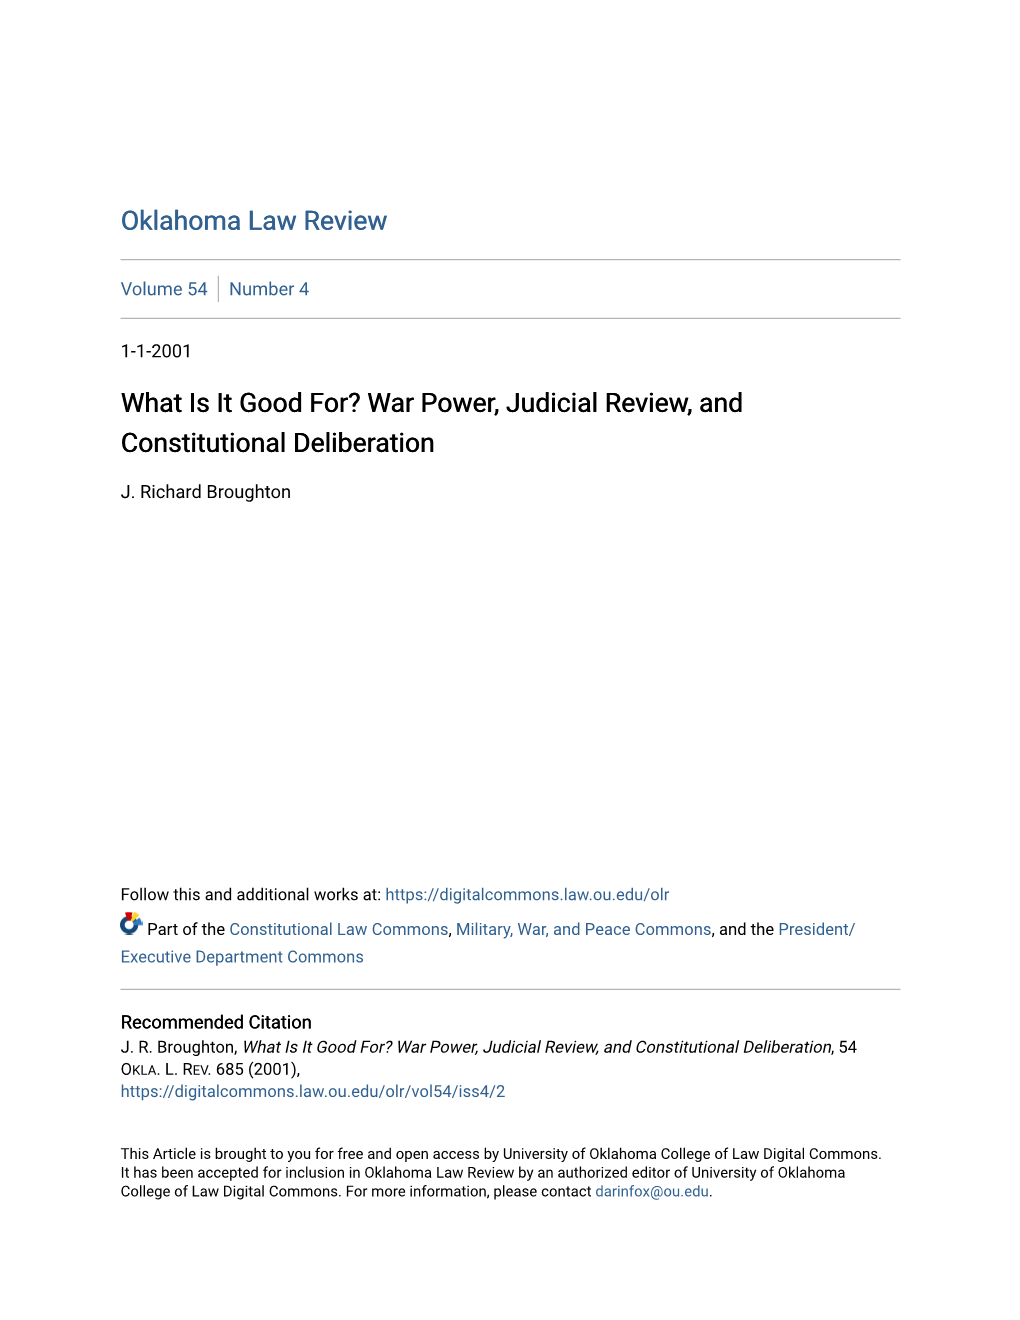 War Power, Judicial Review, and Constitutional Deliberation